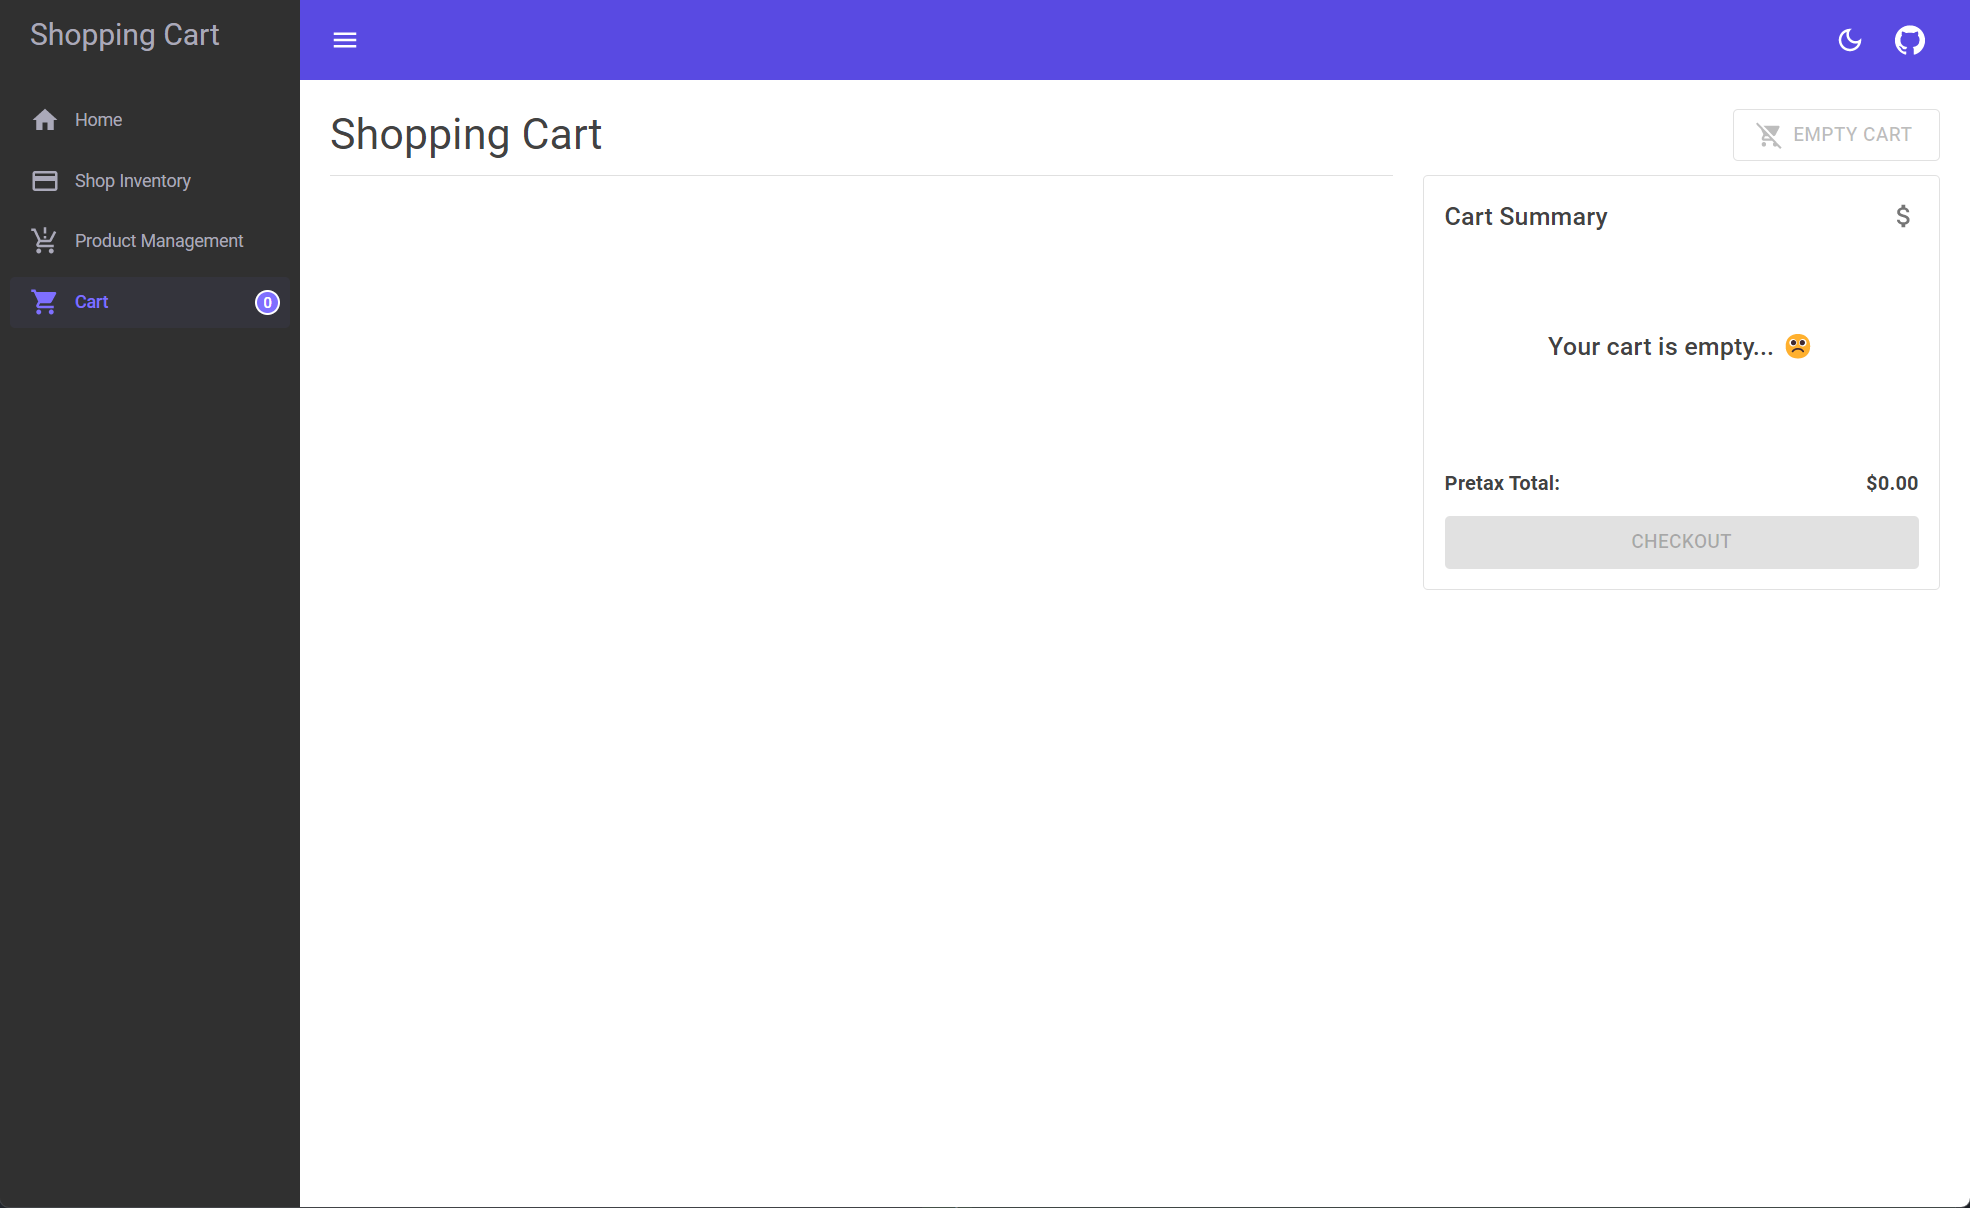 Orleans: Shopping Cart sample app, empty cart page.